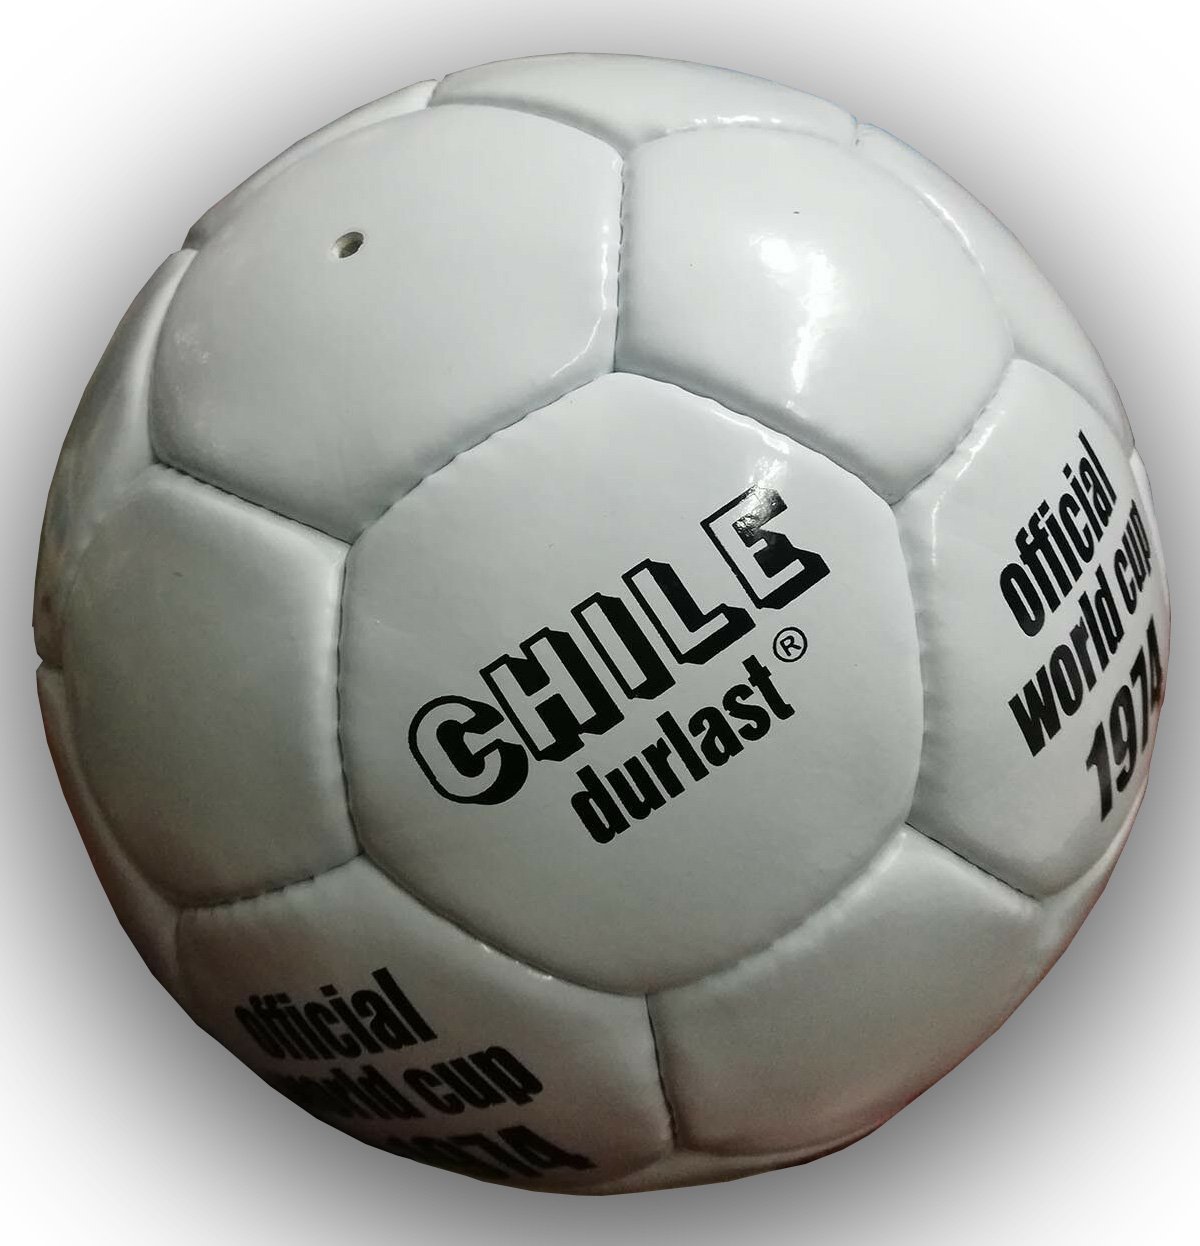 ADIDAS CHILE DURLAST SOCCER ® OFFICIAL MATCH BALL WORLD CUP 1974